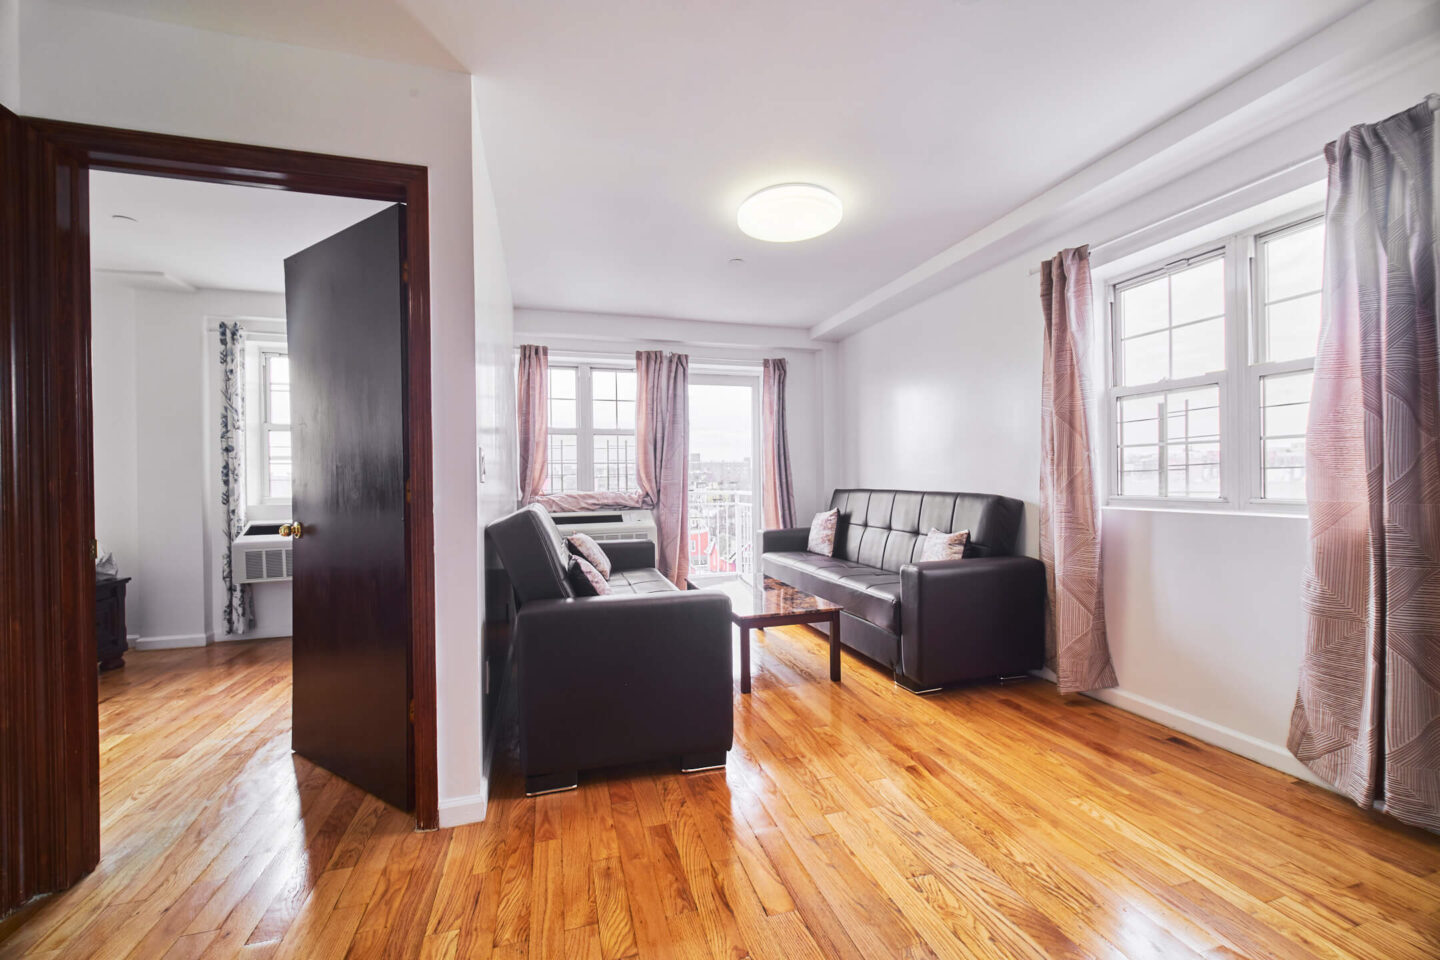 91-12 175TH St, JAMAICA, NY 11432 - Real Estate Photography - AirBnB Photography  